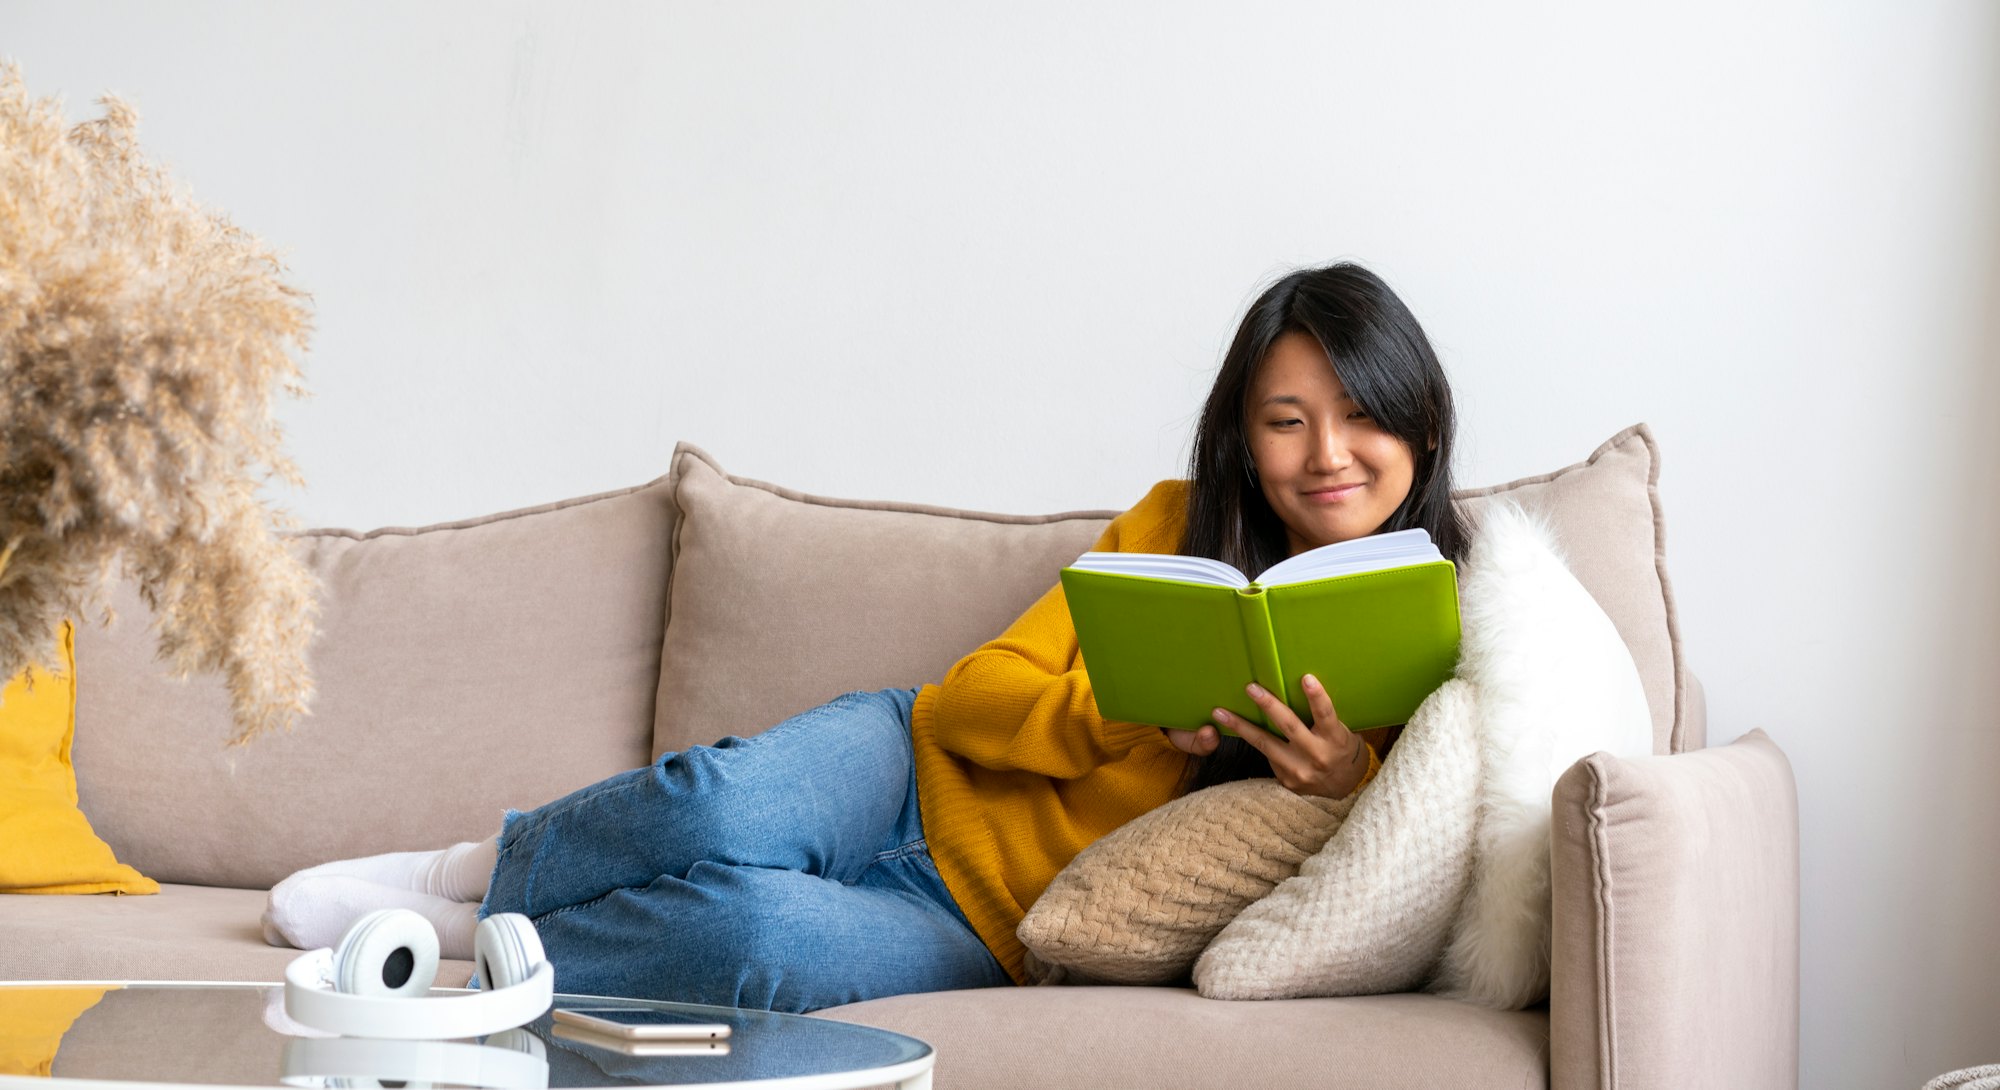 Intelligent asian female lying on couch and reading book. Taking technology break and limiting scree...